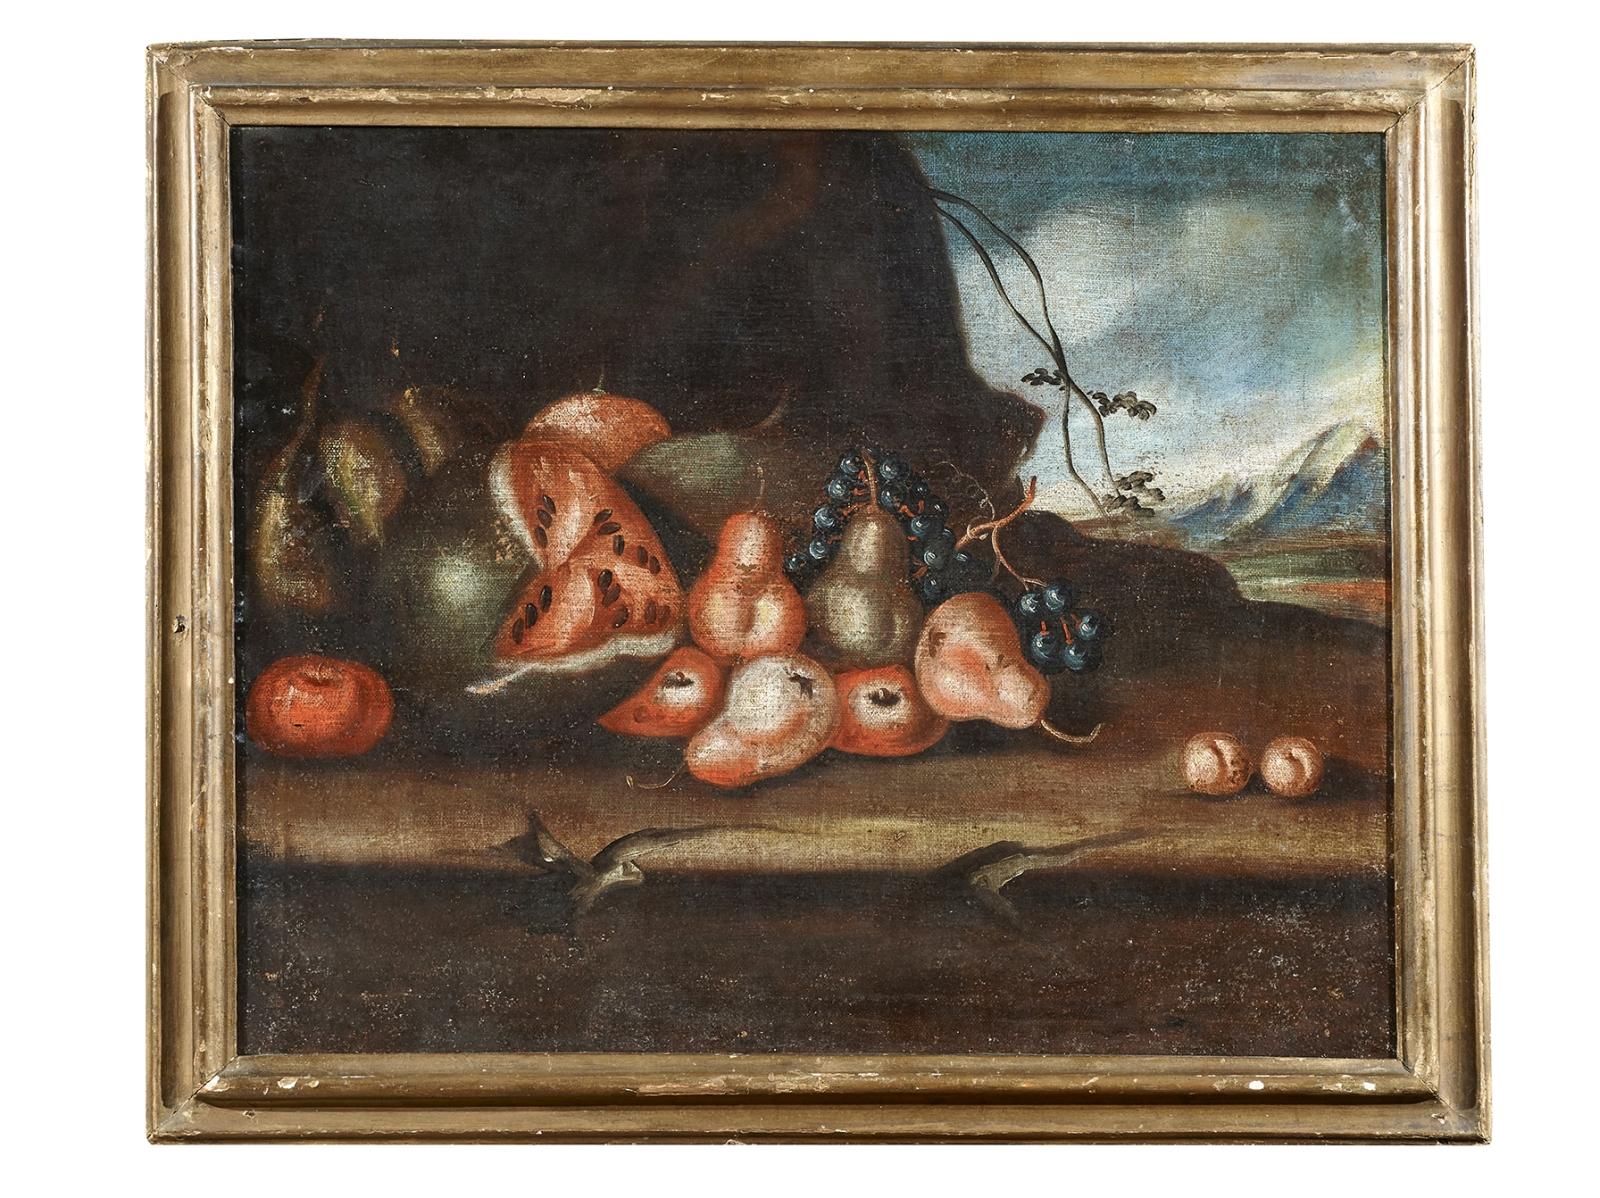 Painting oil on canvas measuring 60 x 74 cm without frame and 70 x 84 cm with frame depicting an archaic still life of fruits (pear, watermelon, grapes) of the beginning of 17th Century.

This calibrated still life of fruit is a beautiful example